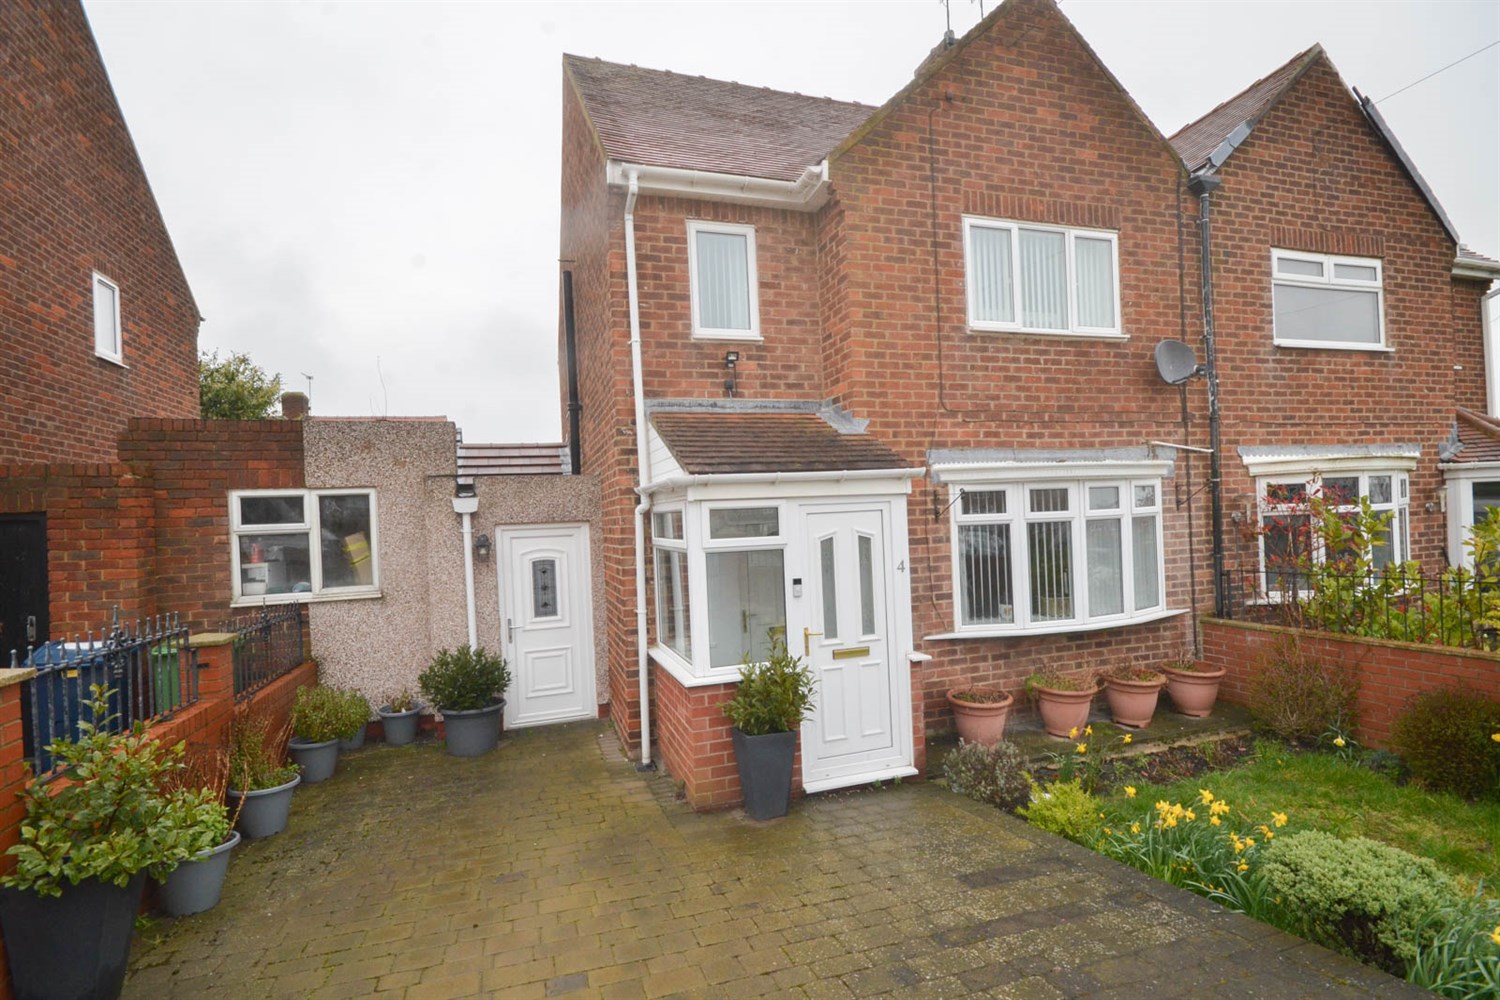 3 bed semi-detached house for sale in Ramilies, Ryhope - Property Image 1